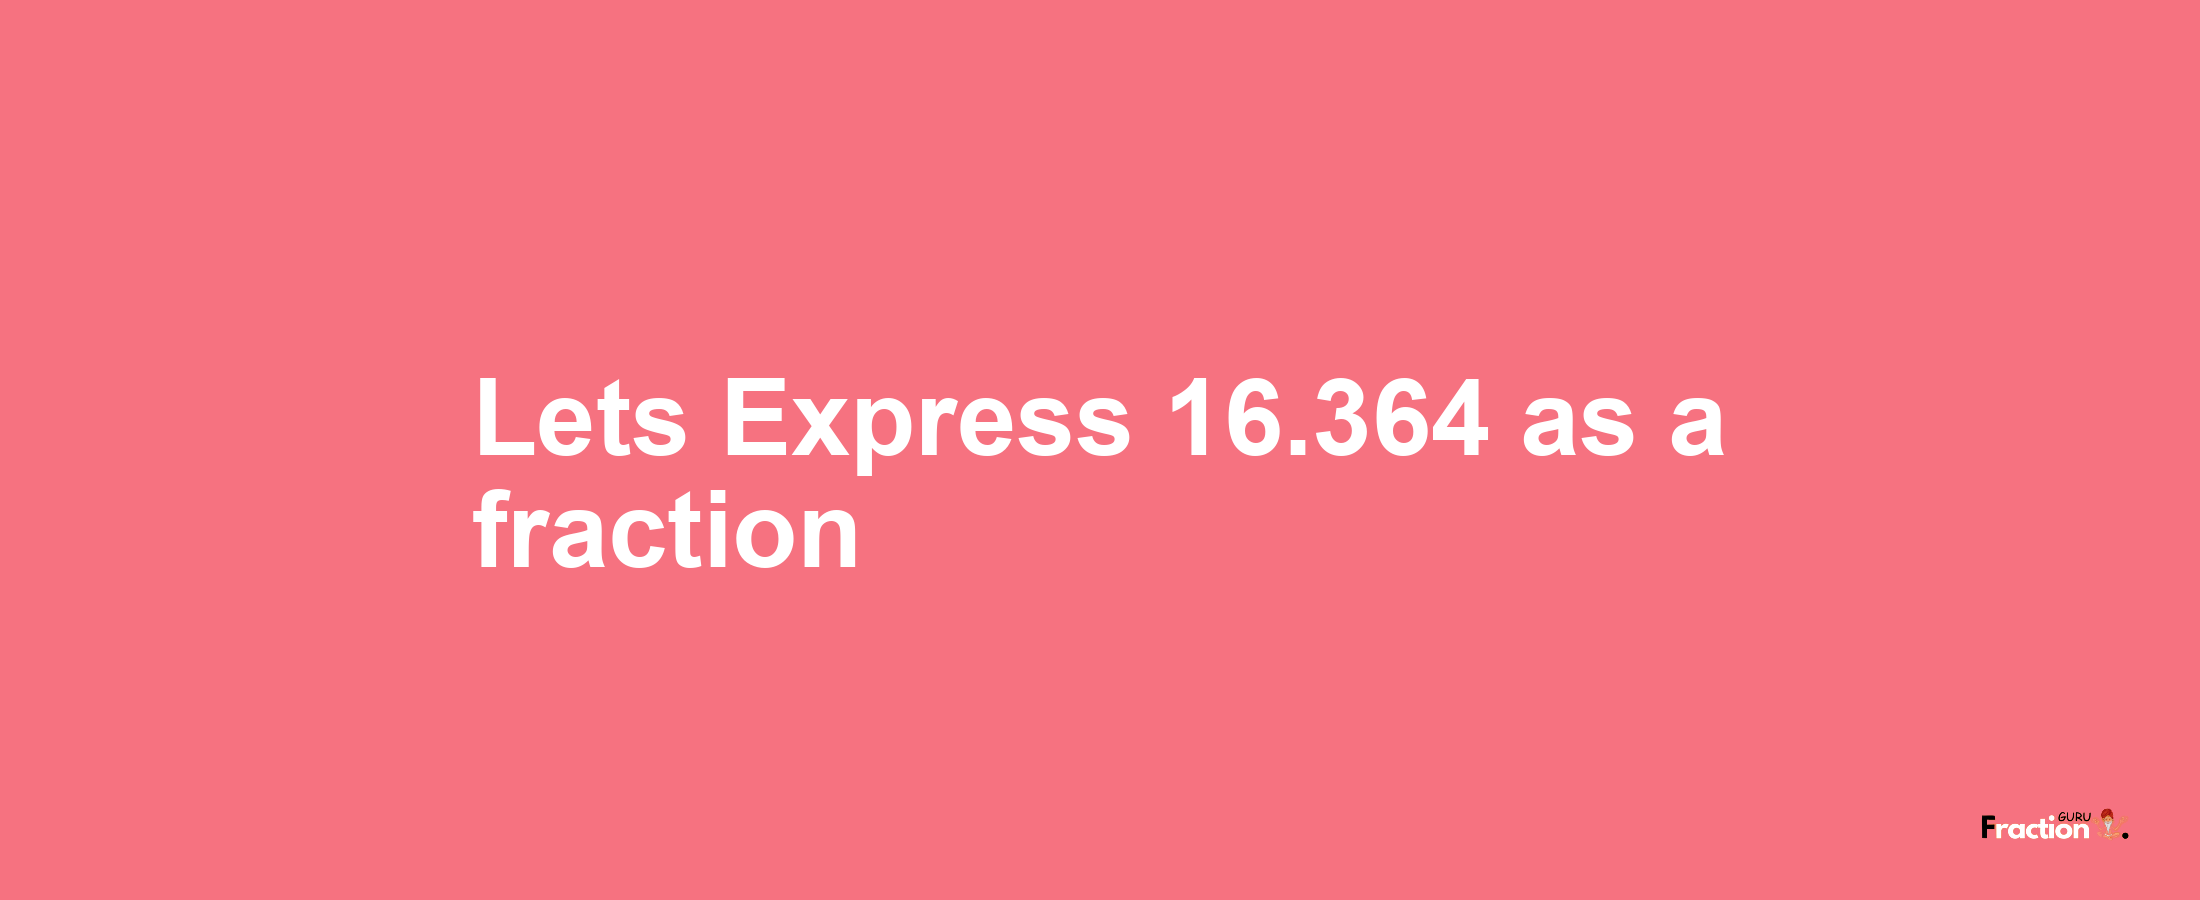 Lets Express 16.364 as afraction